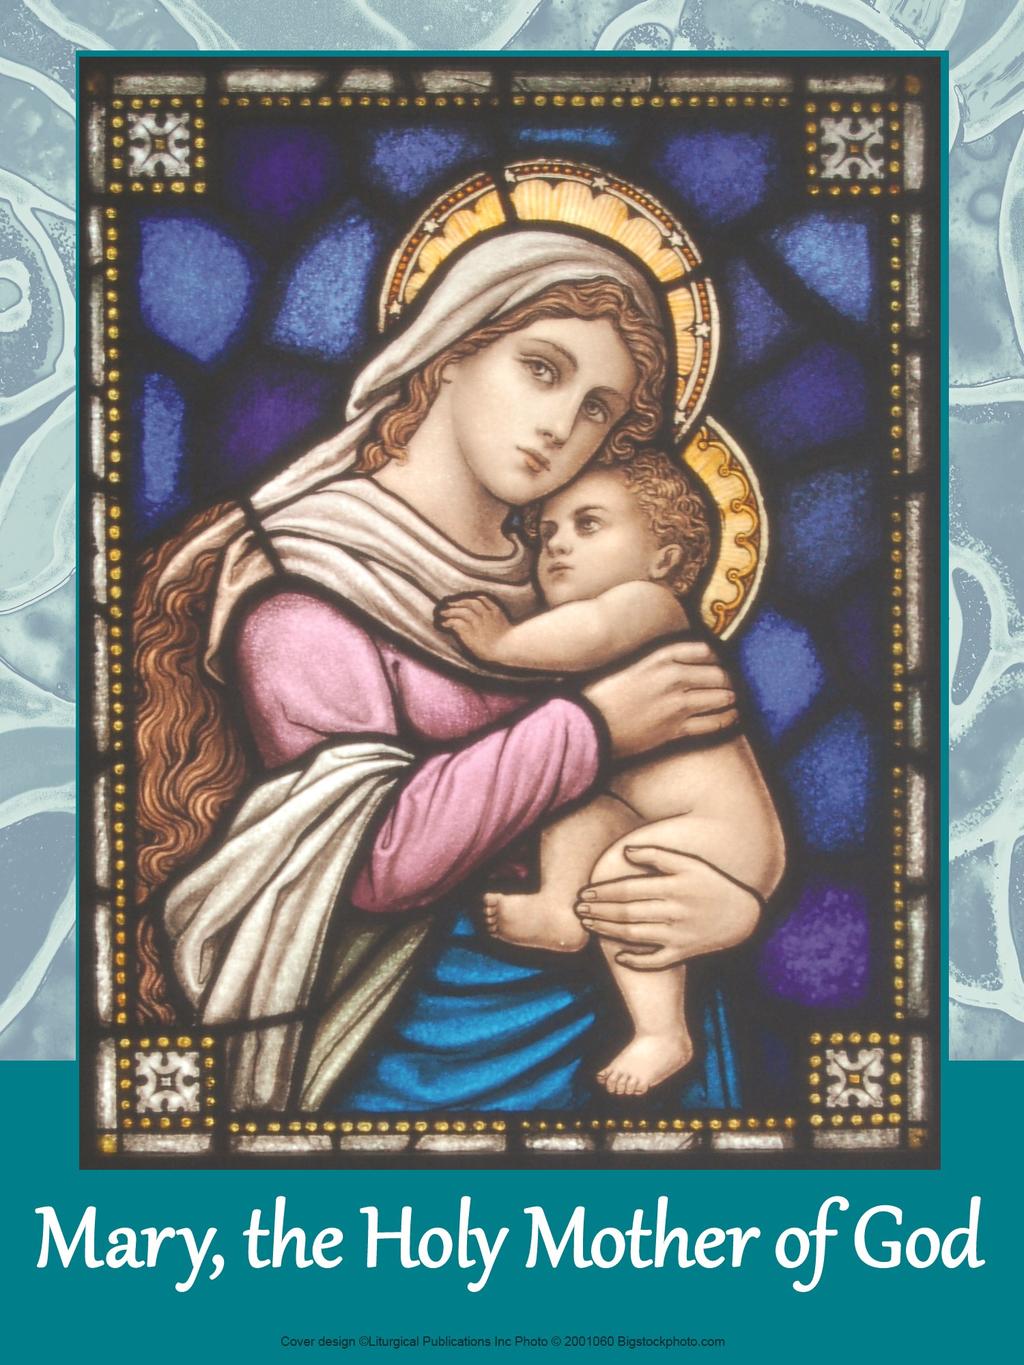 Sunday December 31, 2017 Holy Family Sunday Masses for the Solemnity of Mary, the Holy Mother of